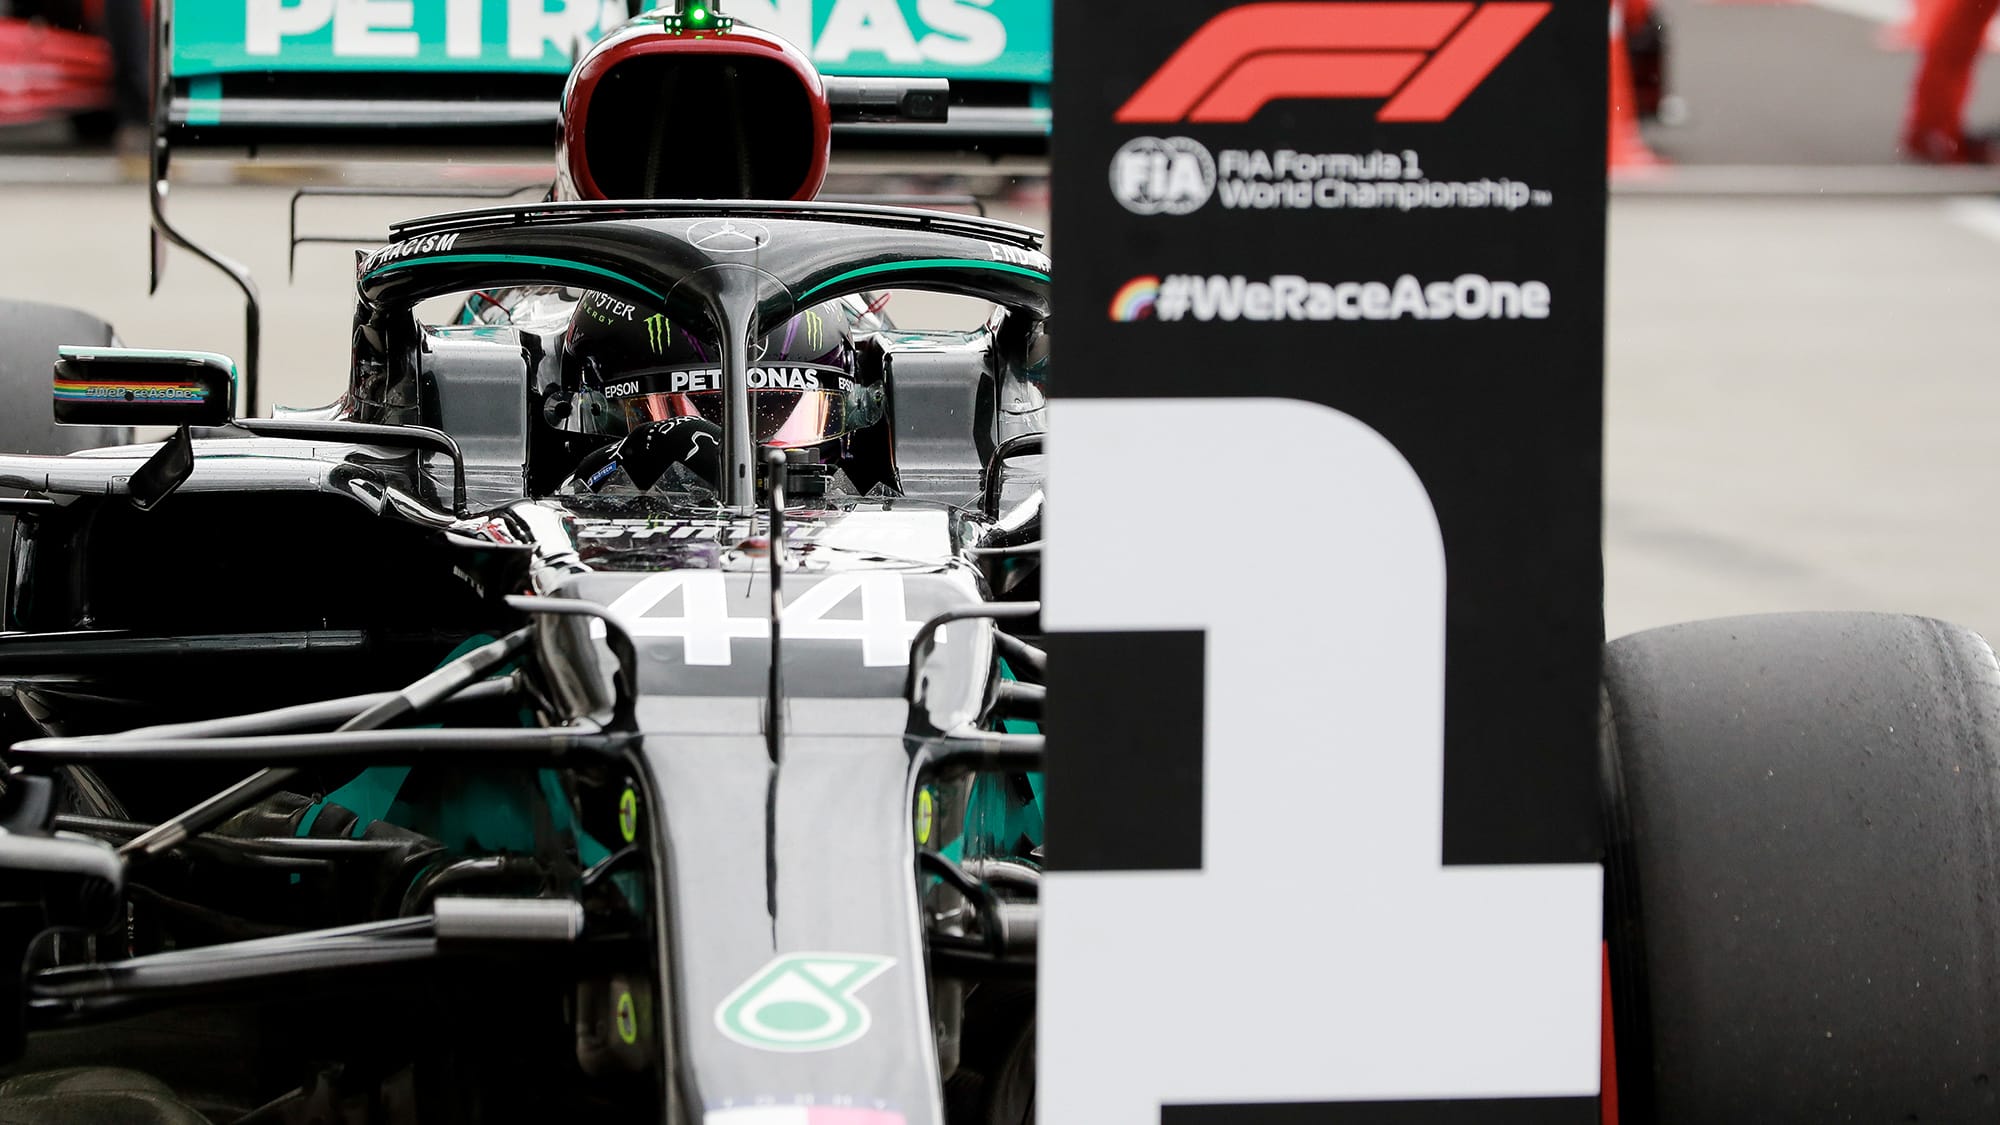 Lewis Hamilton parks his Mercedes in front of the number won board after securing pole at the 2020 F1 Hungarian Grand Prix